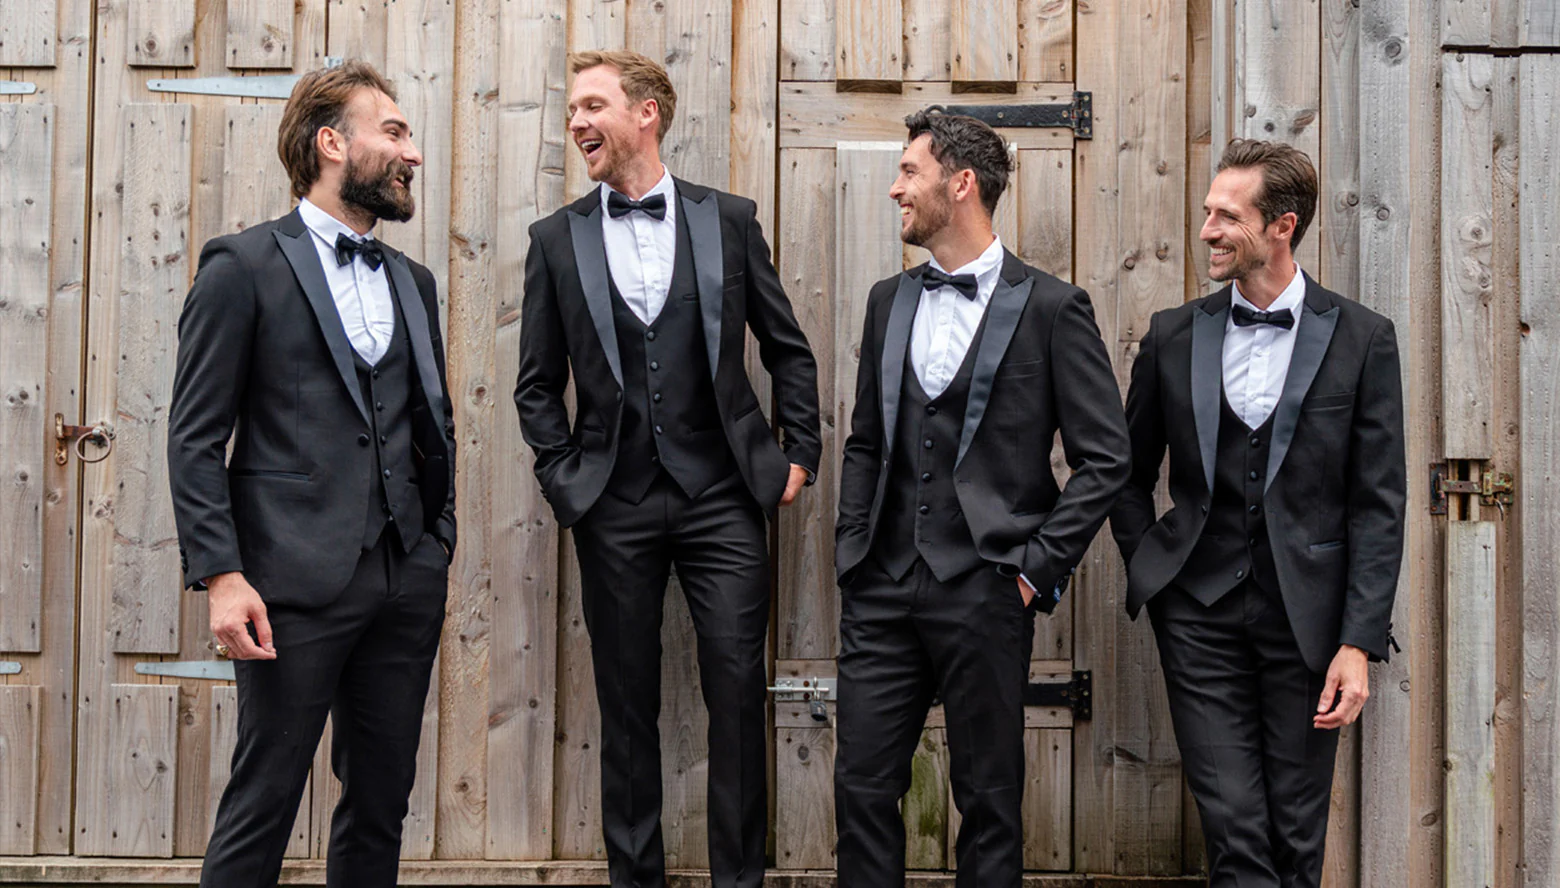 Perfect Your Black Tie (Tuxedo) – Menswear Experts’ 10 Tips